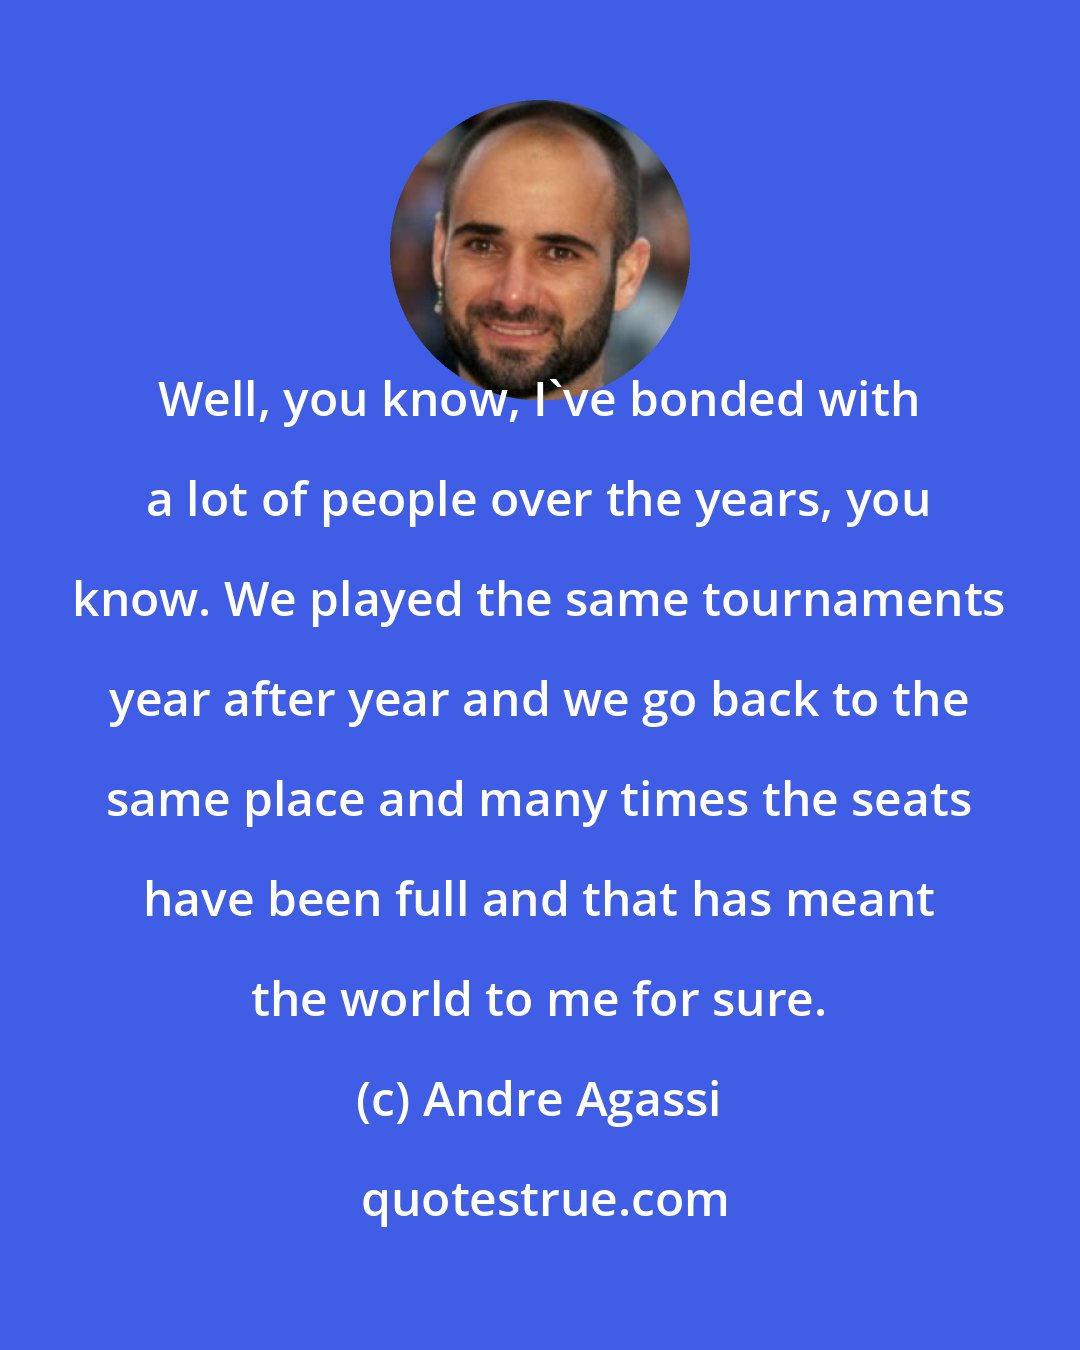 Andre Agassi: Well, you know, I've bonded with a lot of people over the years, you know. We played the same tournaments year after year and we go back to the same place and many times the seats have been full and that has meant the world to me for sure.